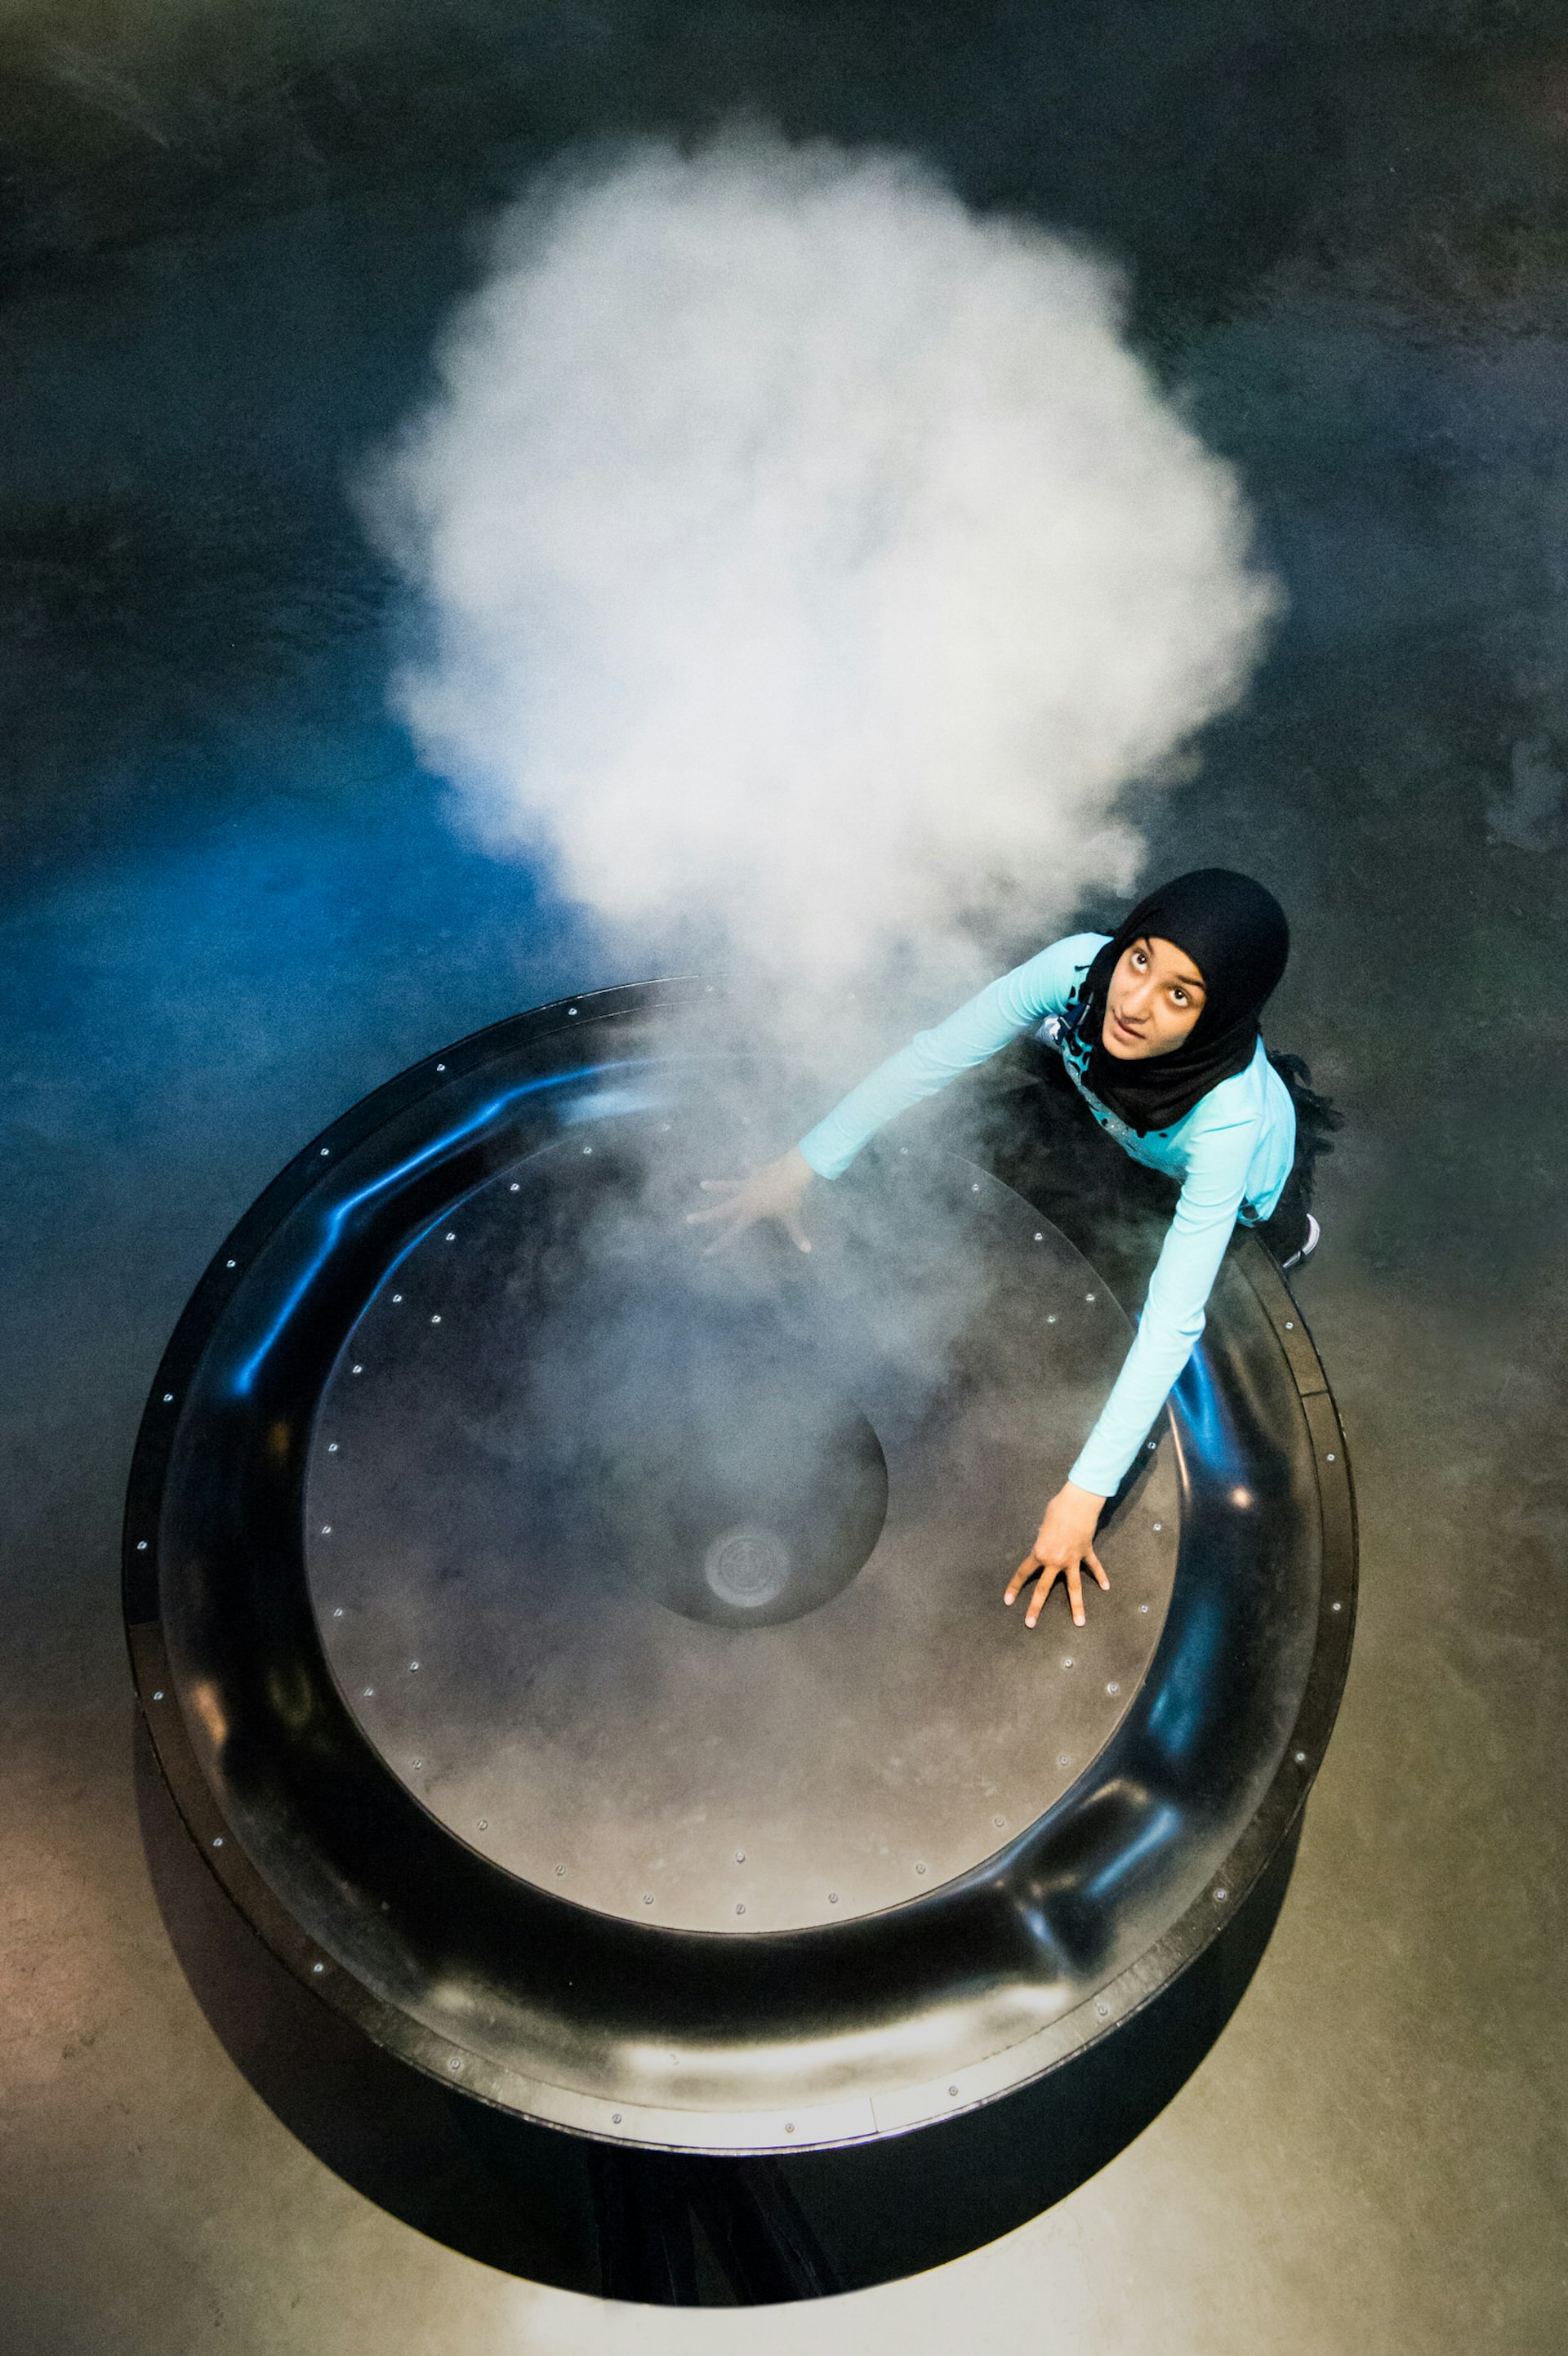 A teenage girl looks at a cloud created at the Exploratorium science museum, San Francisco © Exploratorium, www.exploratorium.edu